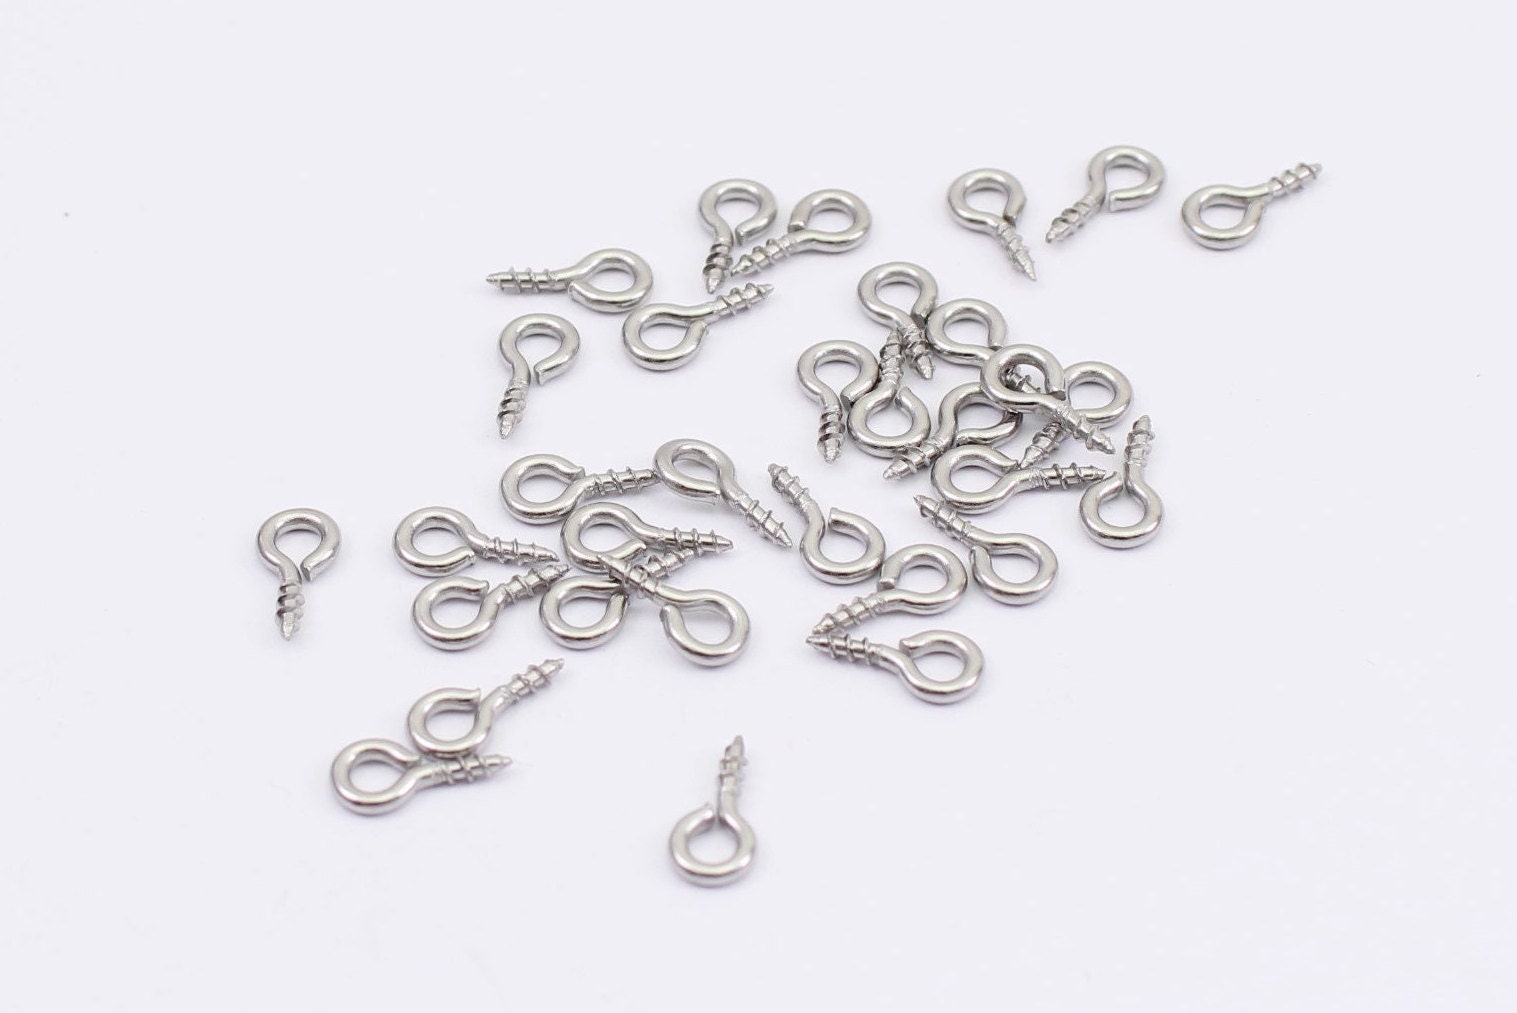 150 X Tiny 8mm Stainless Steel Screw Eye Pins / Bails 